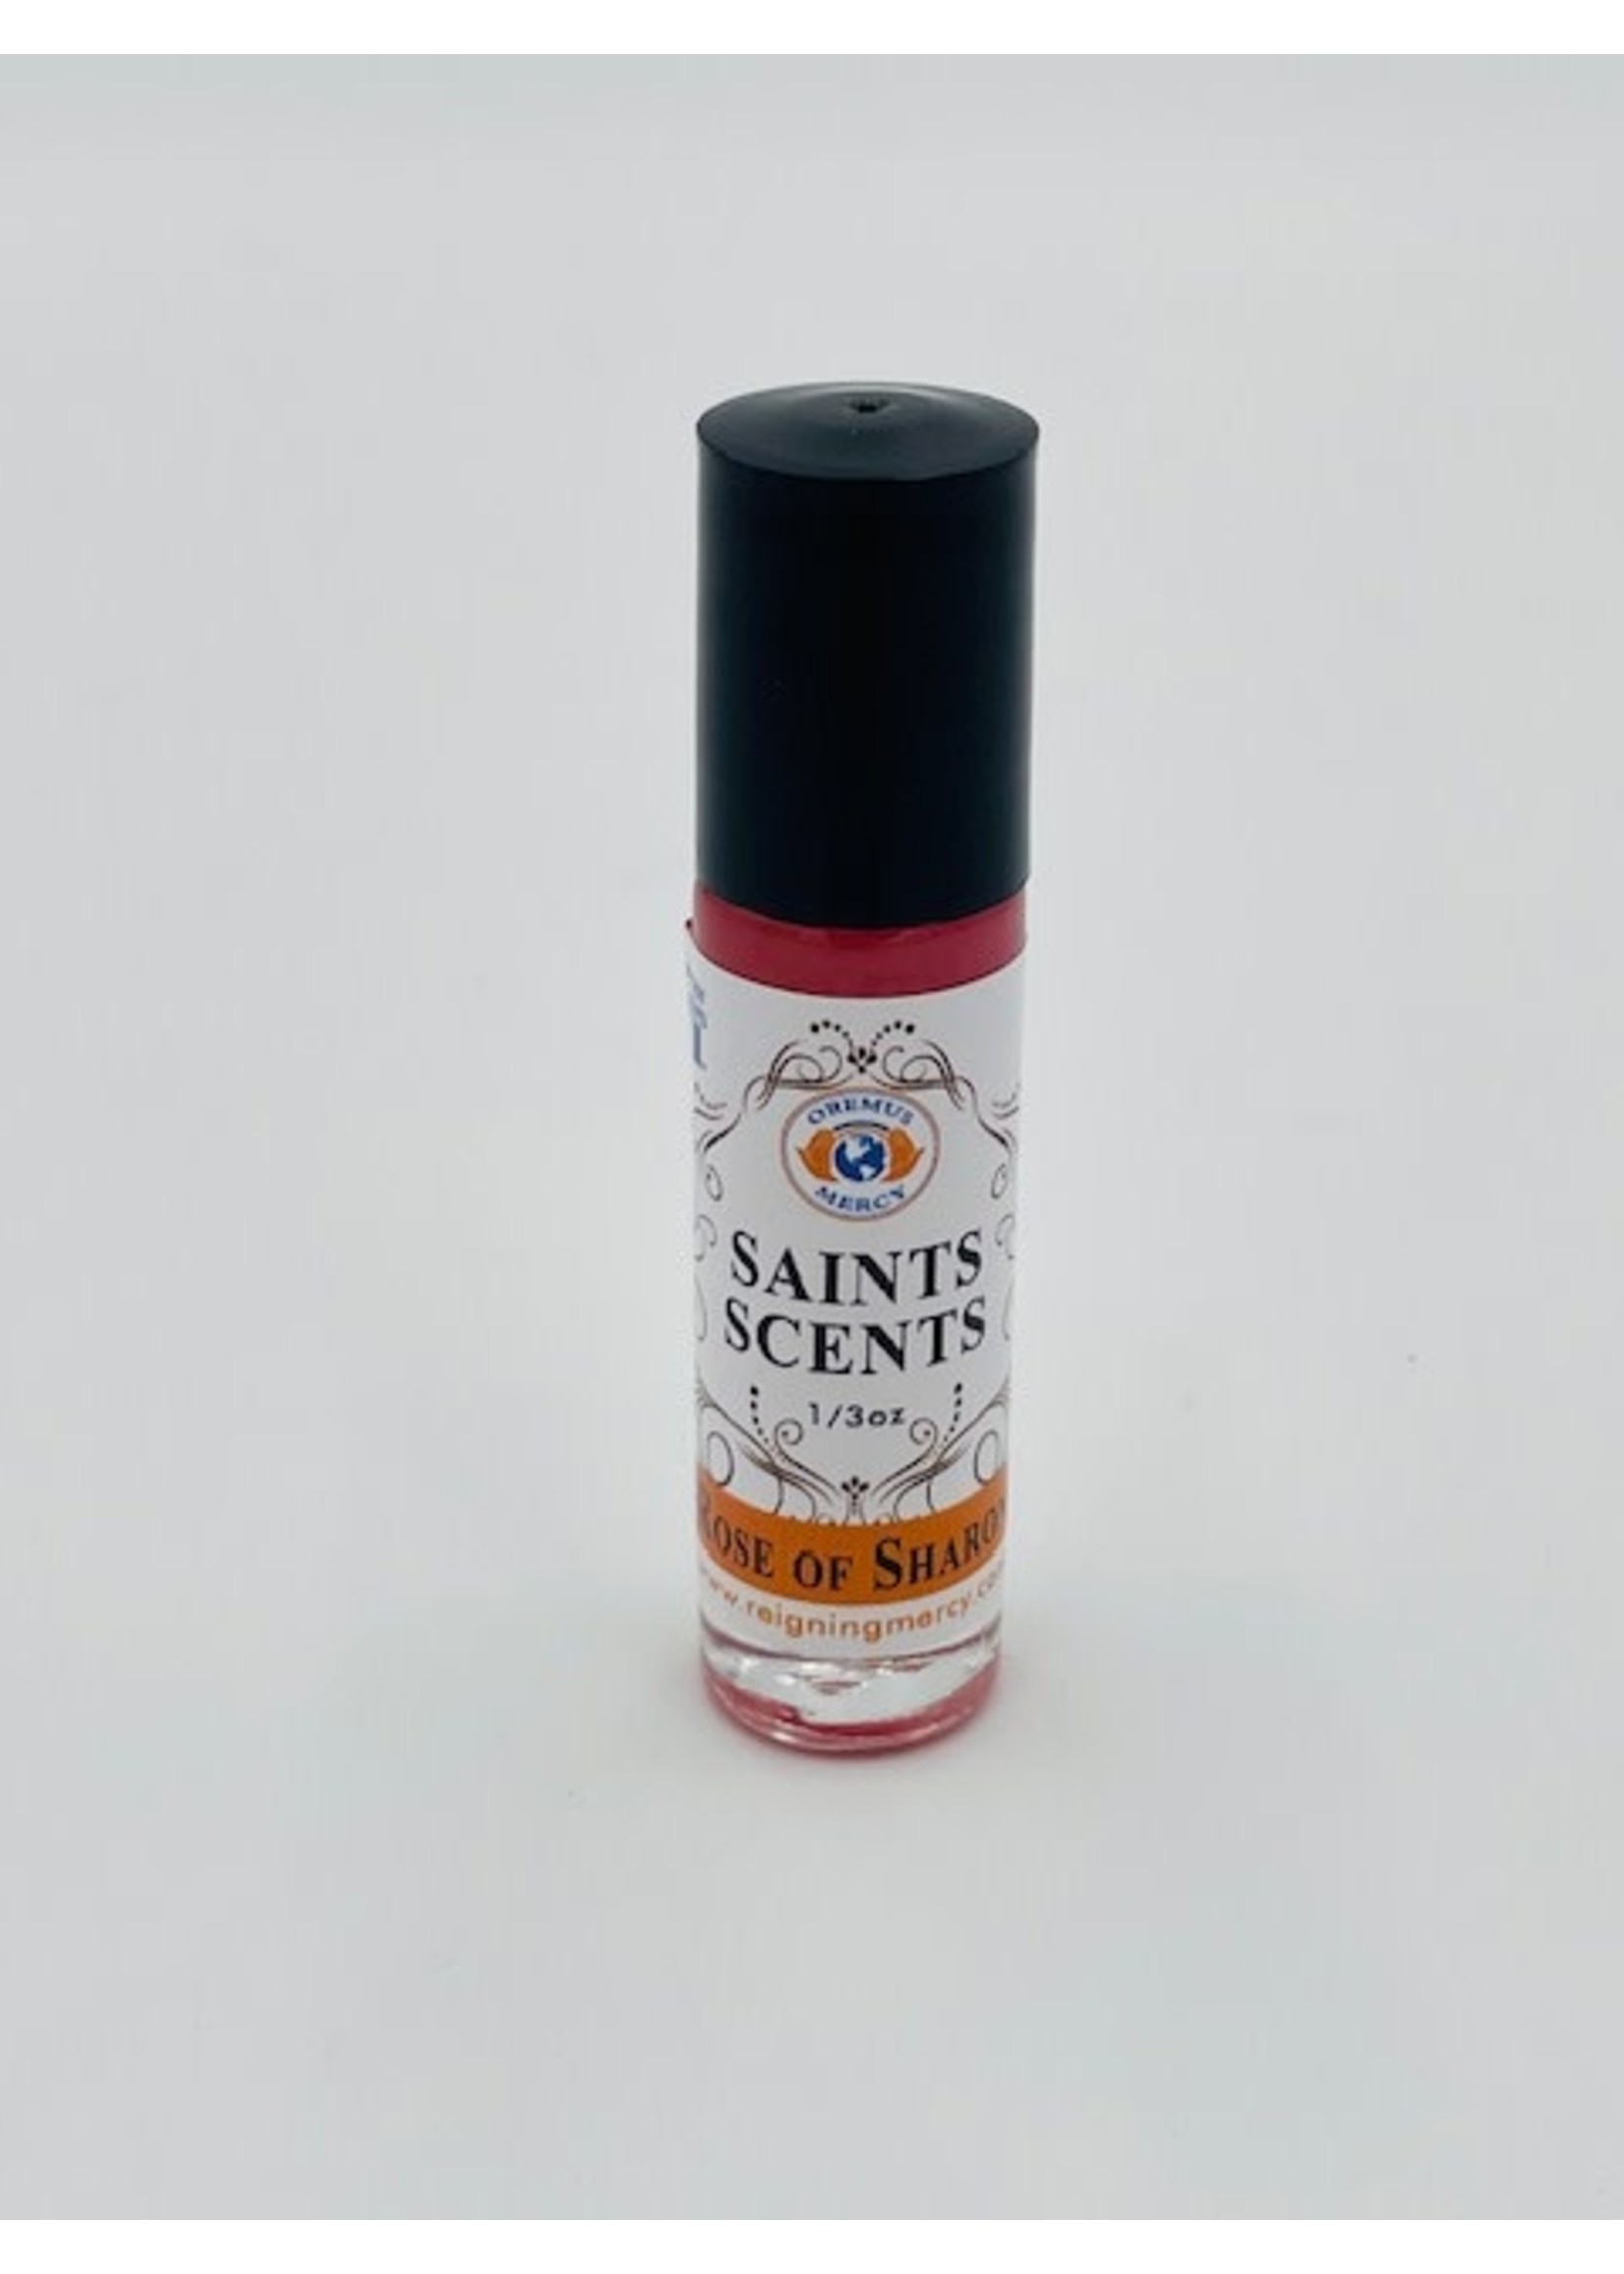 Rose of Sharon – Scented Oil  (1/2 oz)